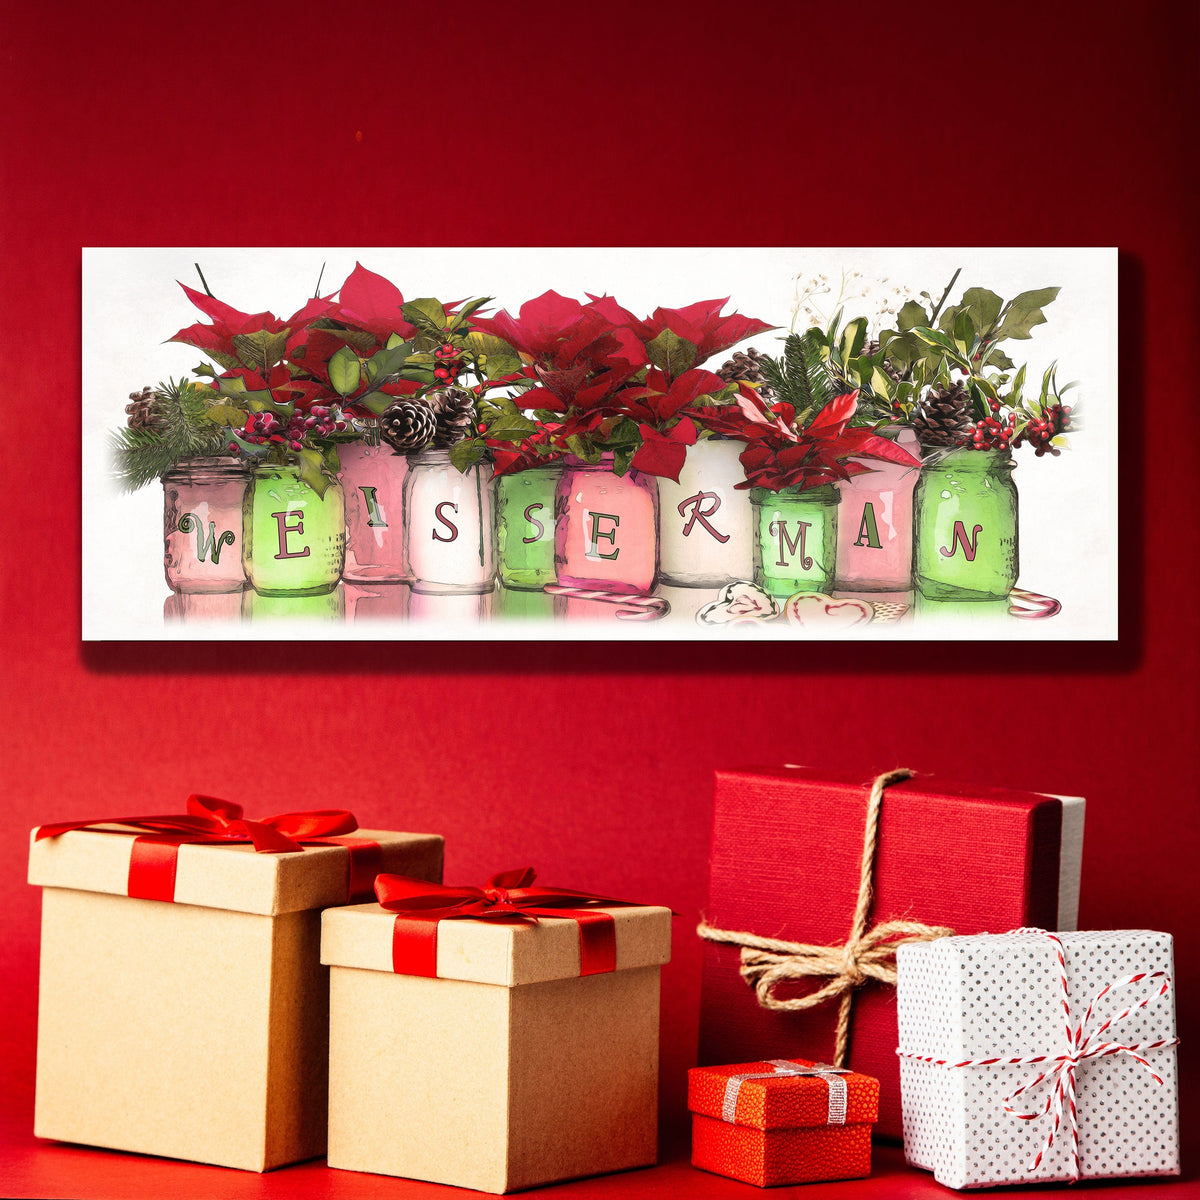 Your family name is personalized in the art. The perfect personalized Christmas gift idea. 